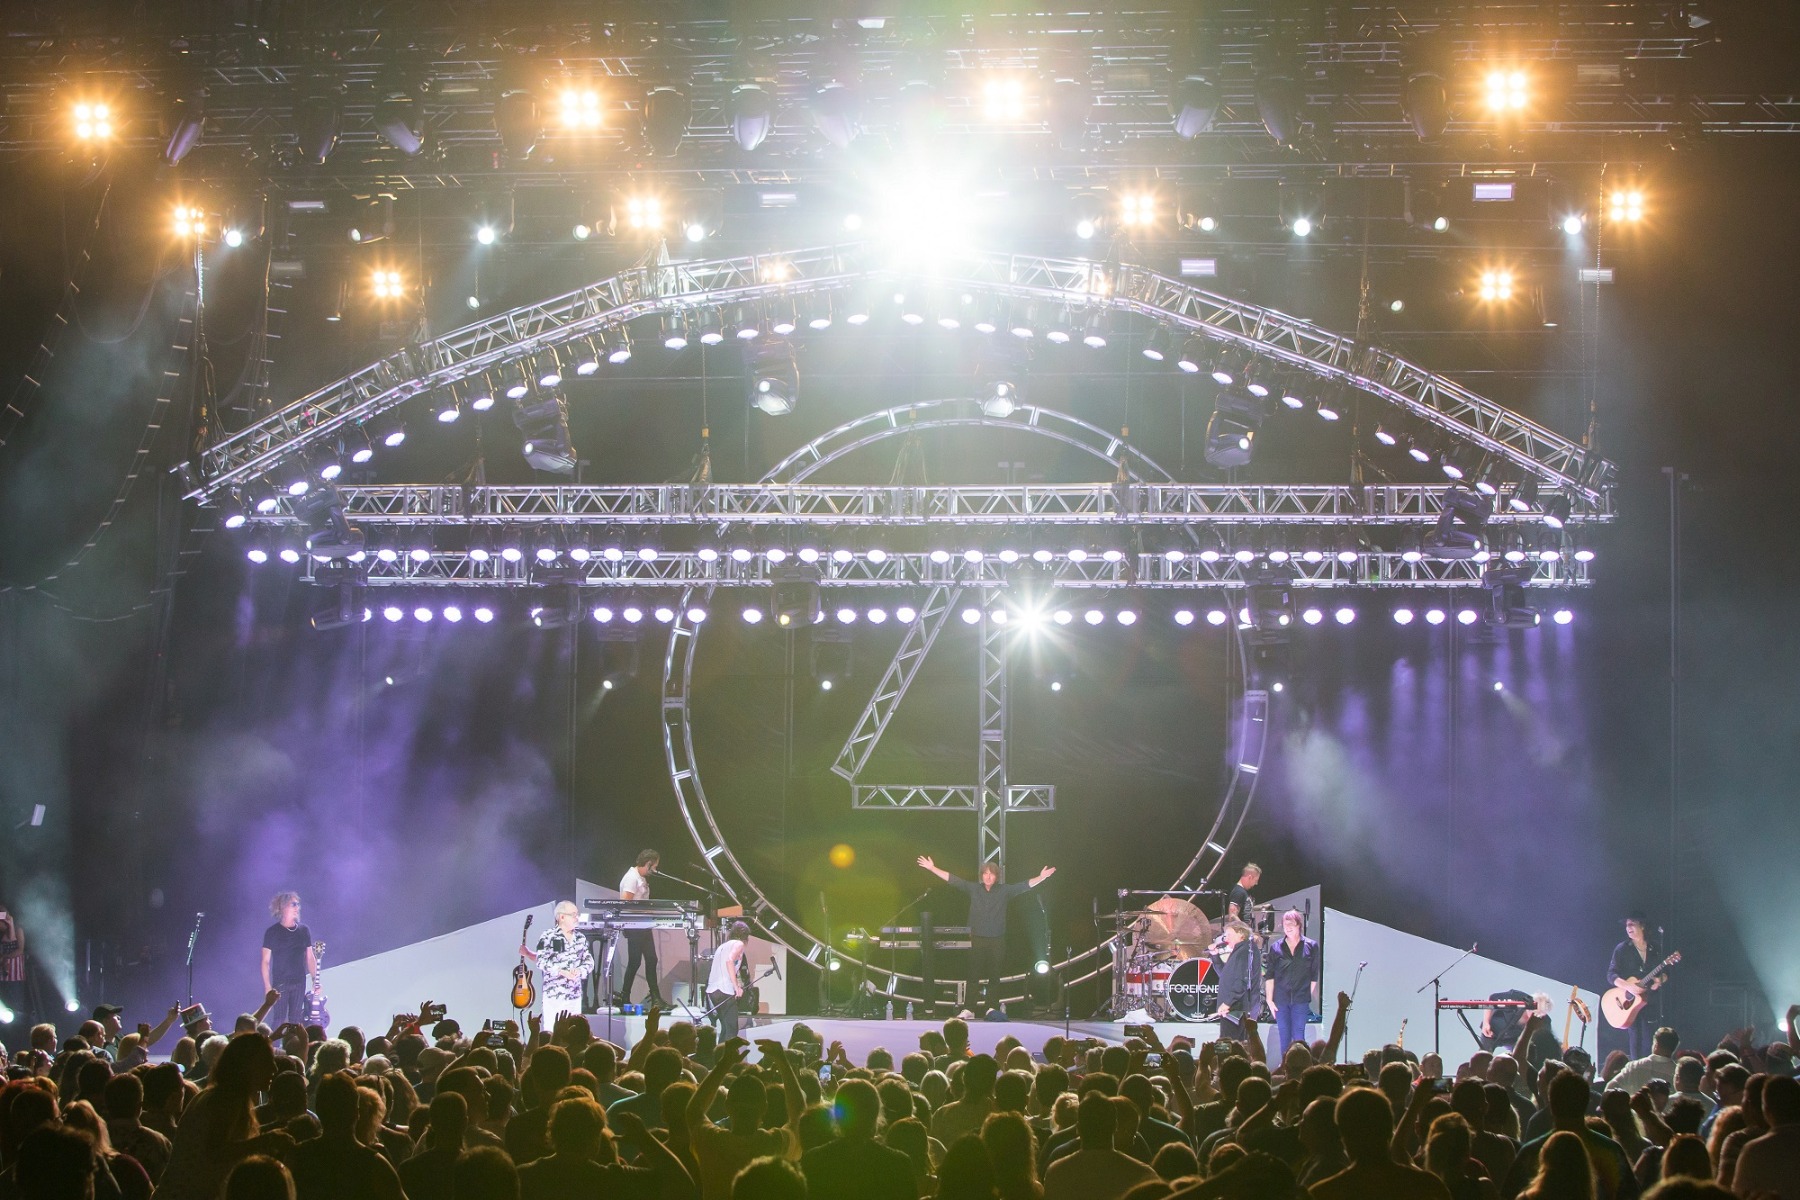 See Factor Supplies Elation Arena Pars for Foreigner 40th Anniversary Tour Gallery Image foreigner jonesbeach 2 